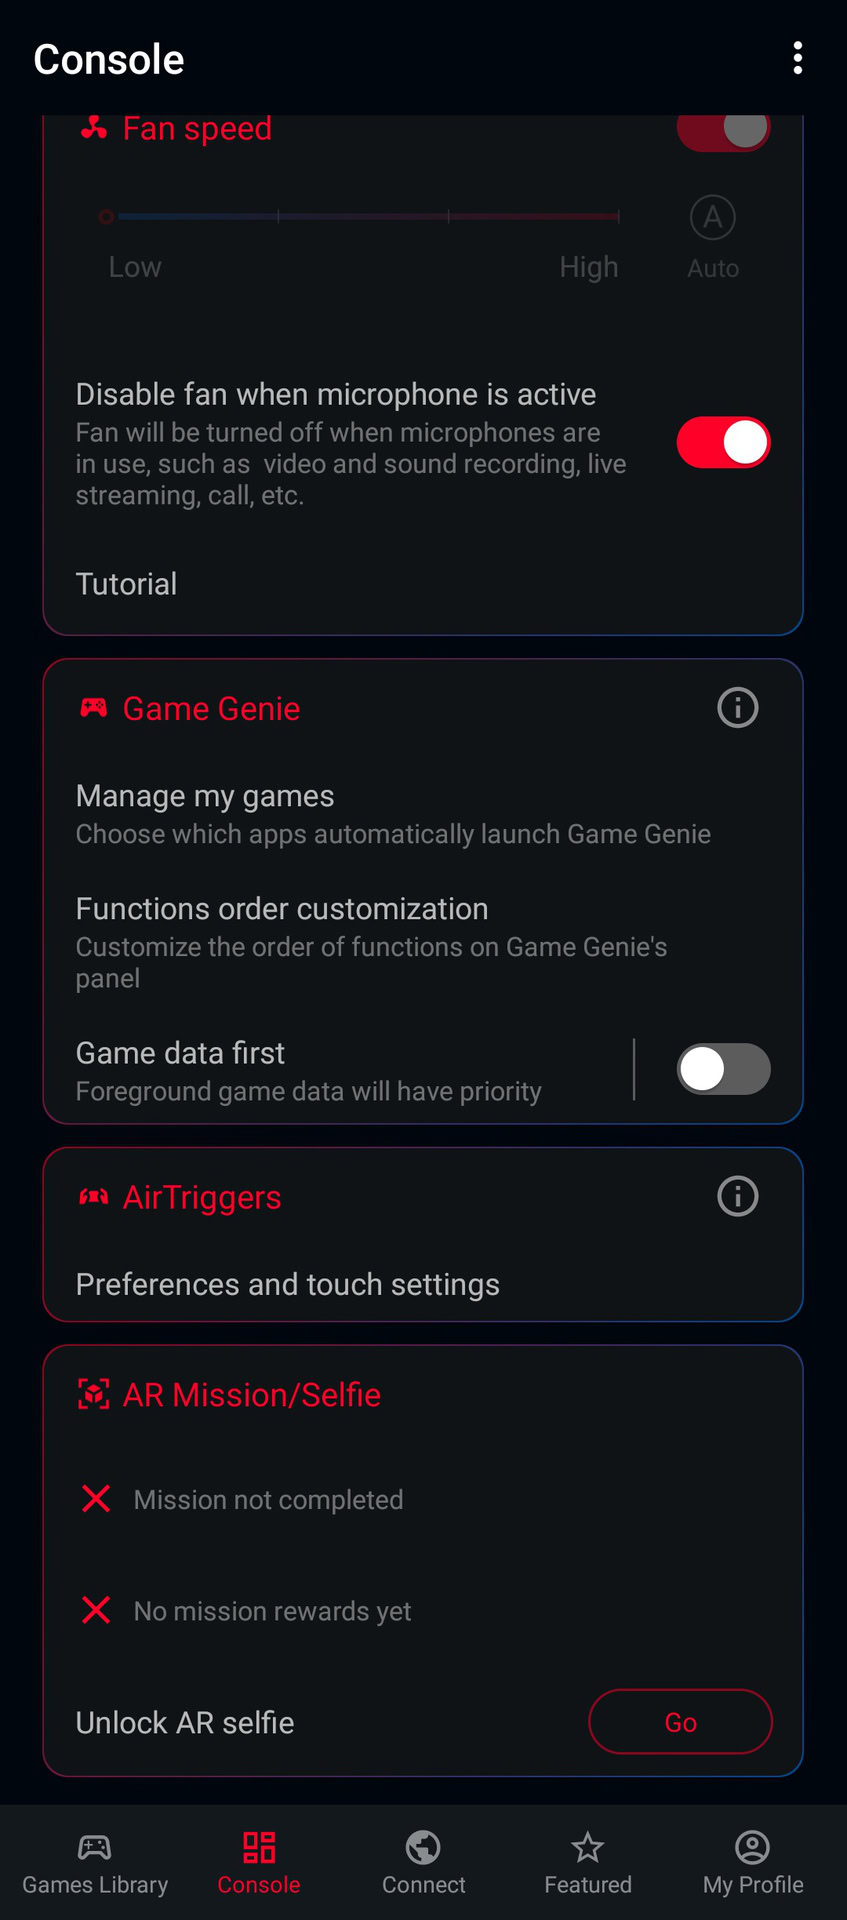 ROG Phone 5 screenshot of the third layer of options in the Armor Crate console